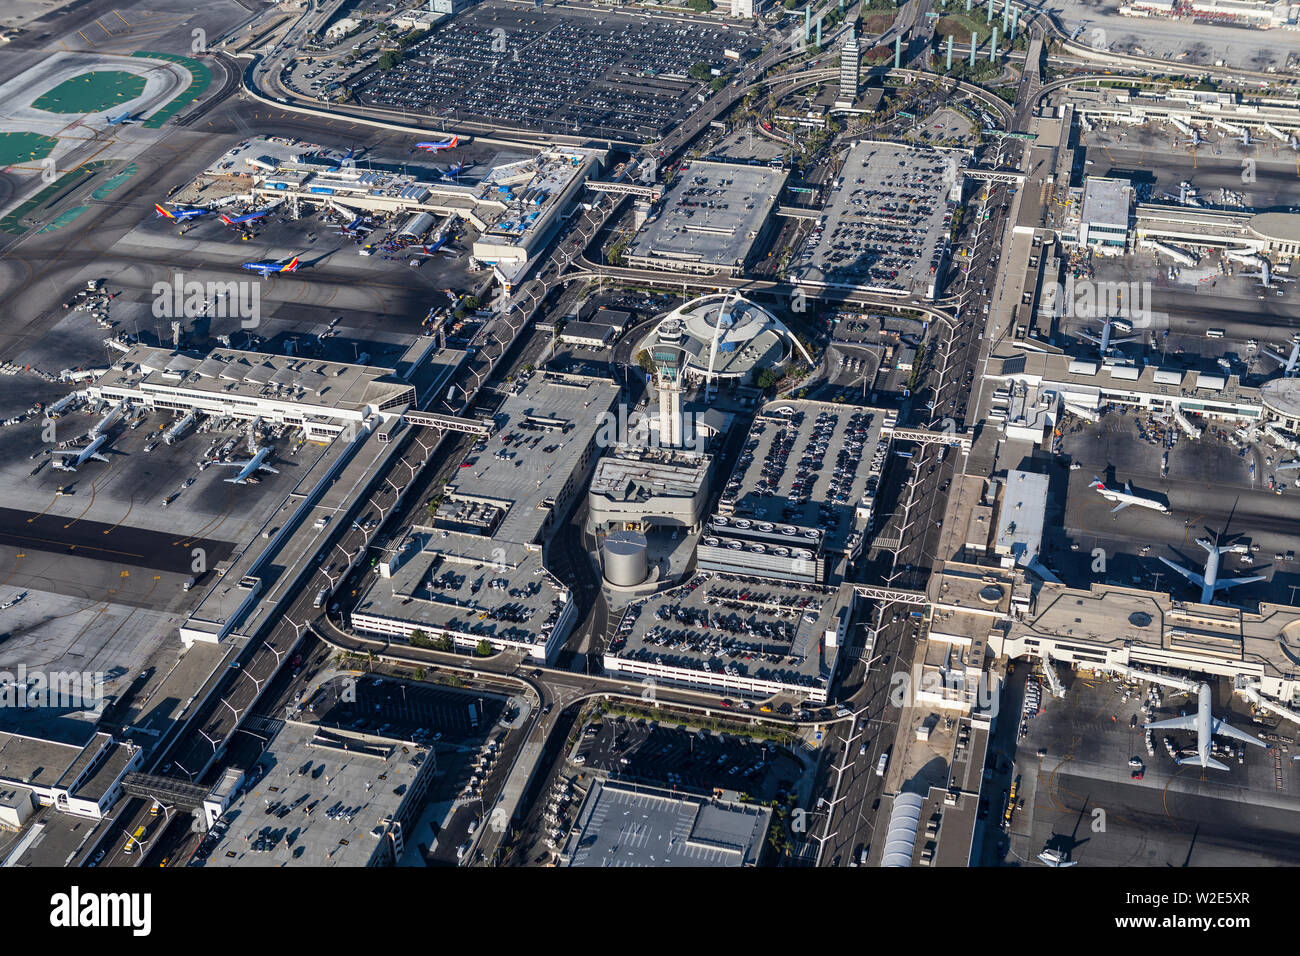 Los Angeles, California, USA - August 16, 2016:  Afternoon aerial view of roads, parking lots and terminals at LAX Airport in Southern California. Stock Photo